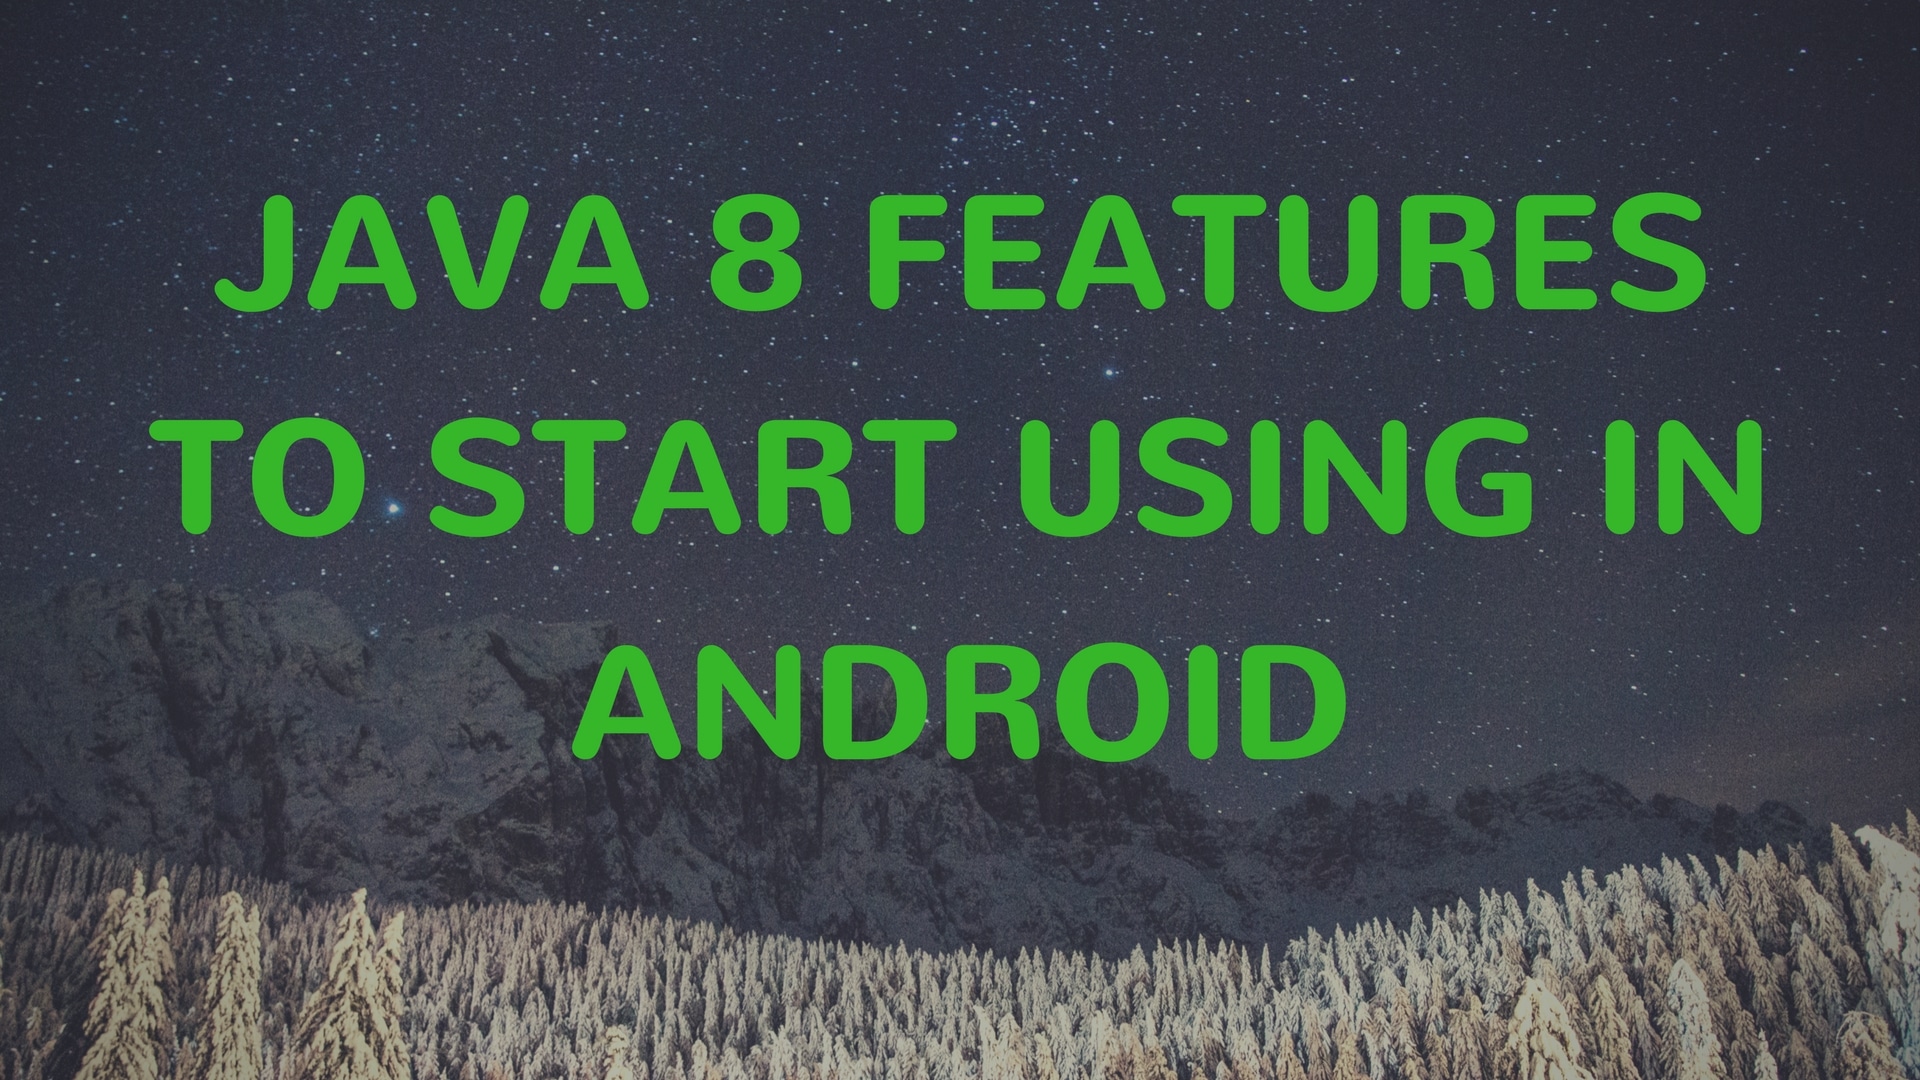 Java 8 Features to start using in Android